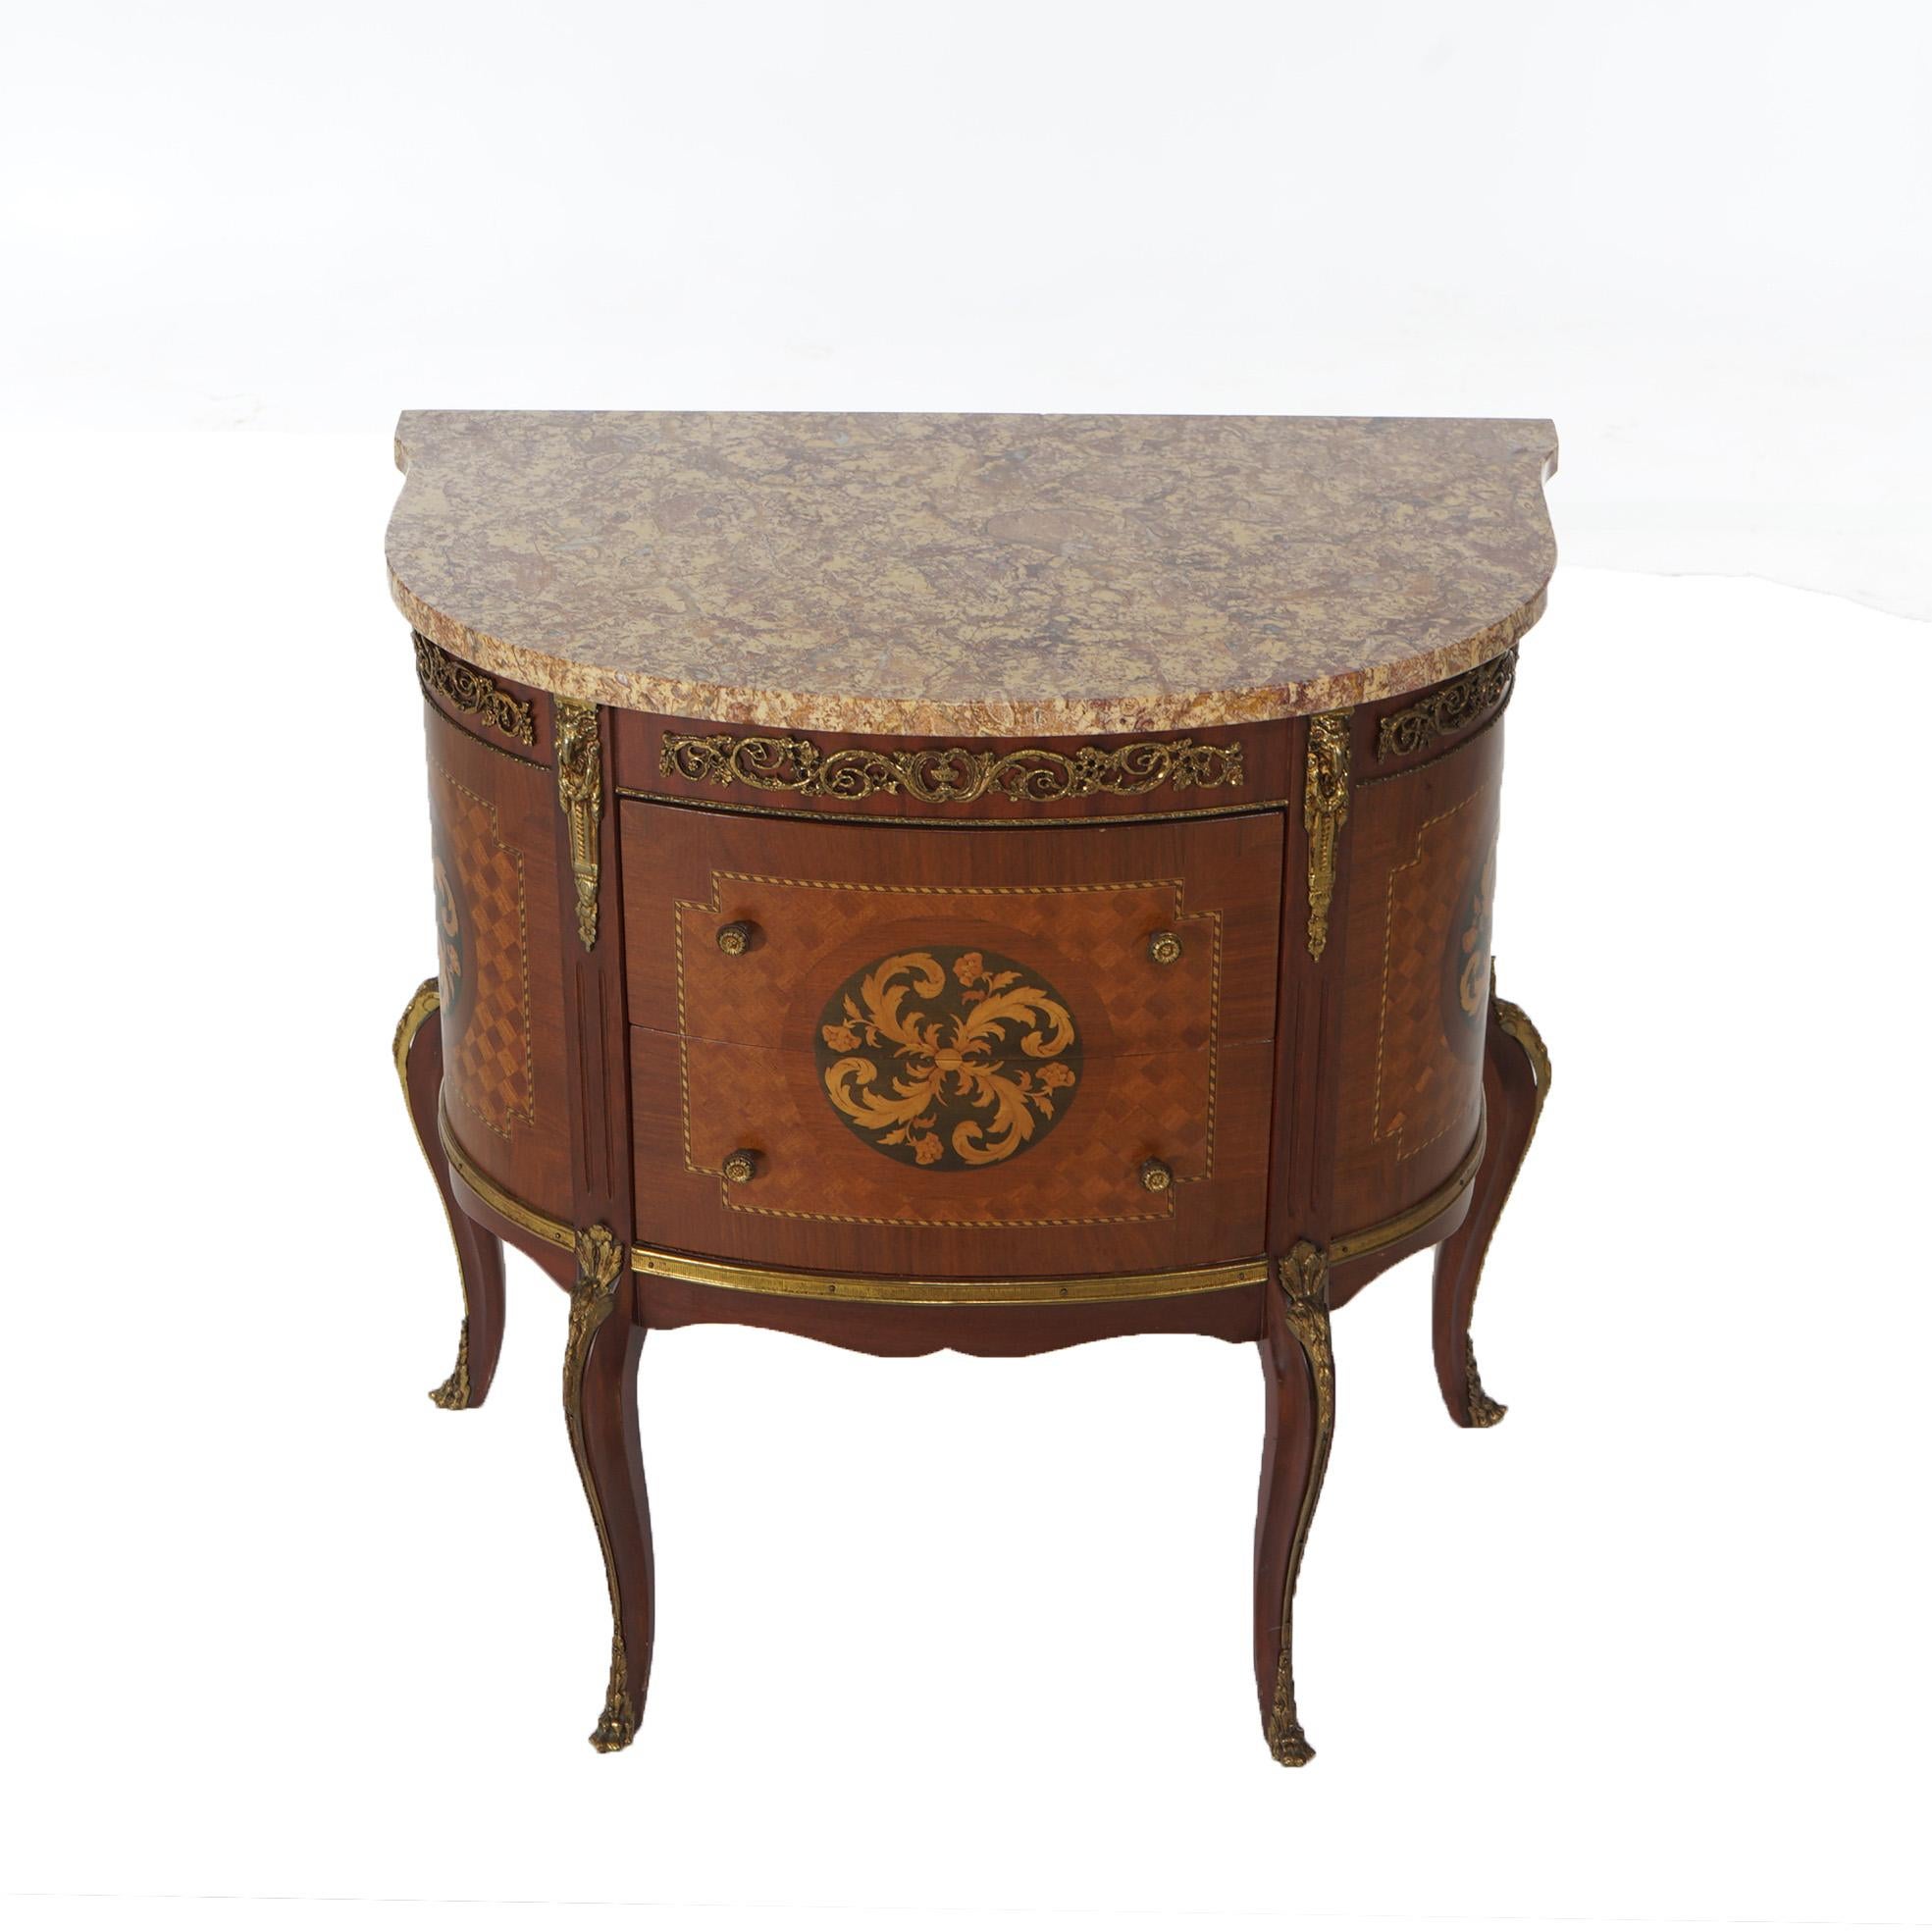 20th Century Antique French Style Parquetry Inlay & Ormolu Marble Top Side Table C1920